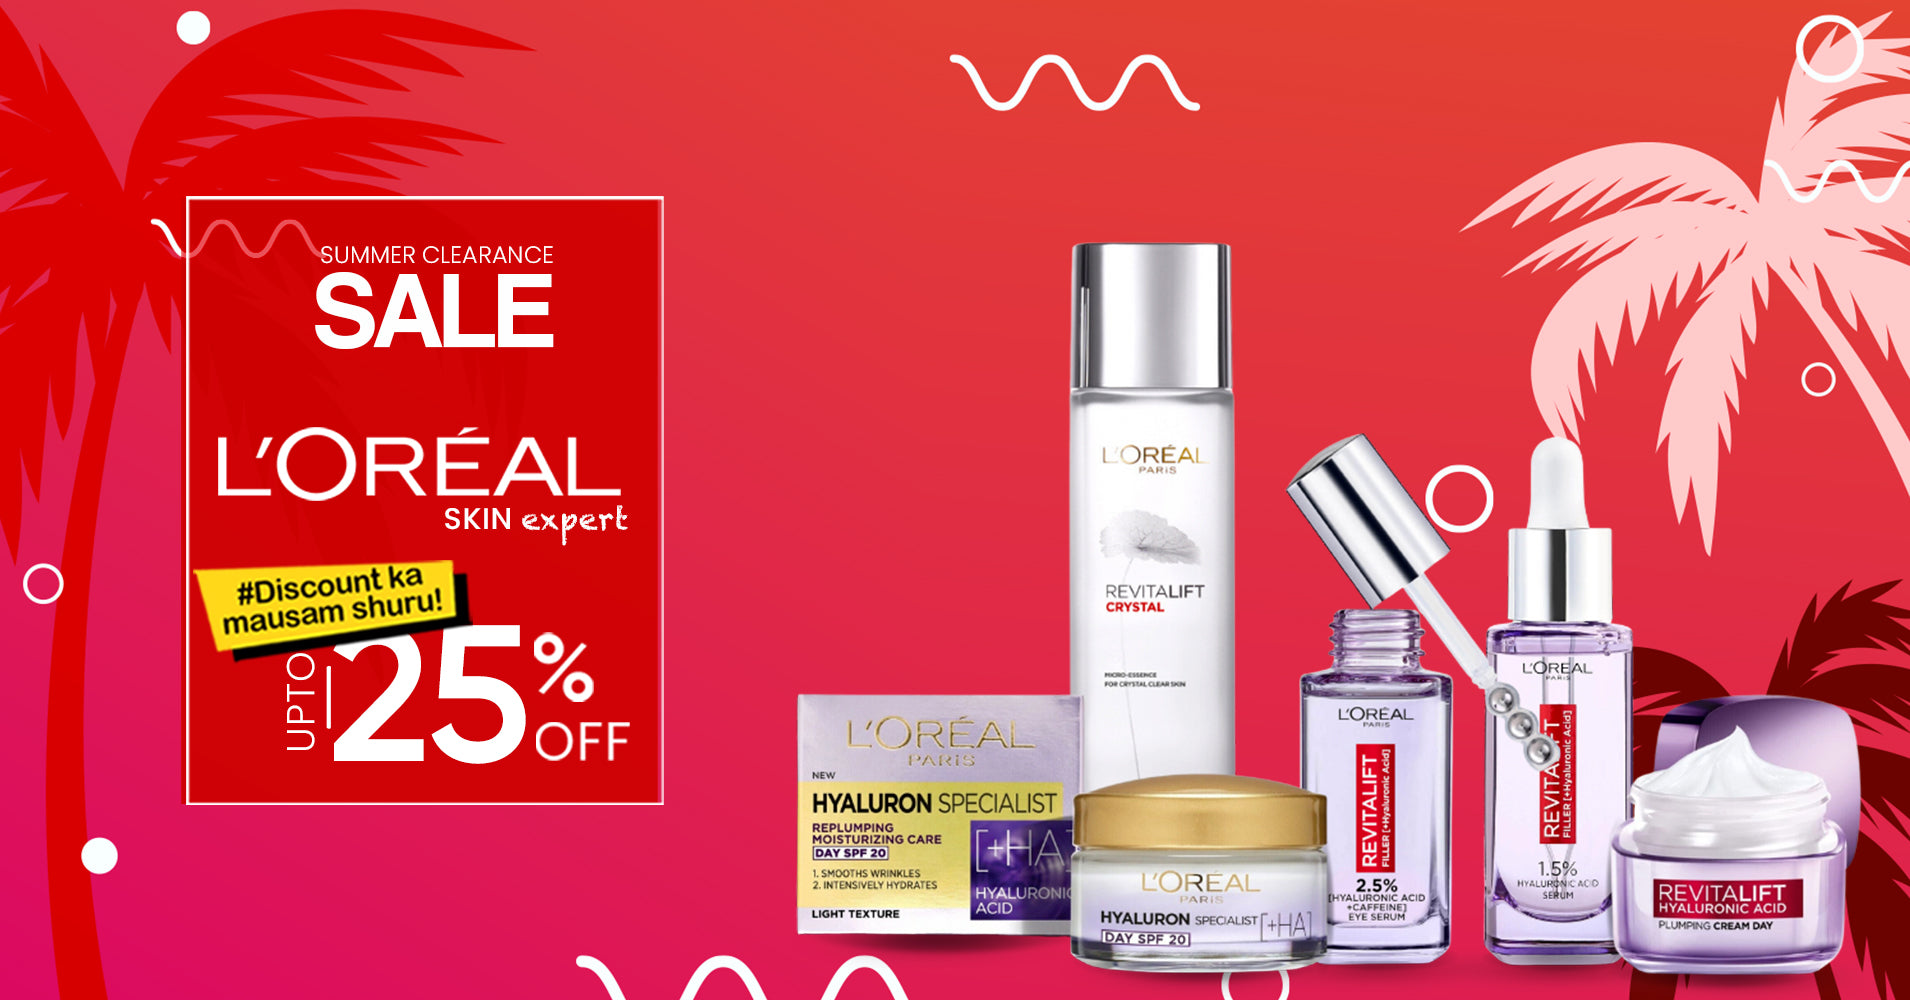 Summer Clearance Sale | Loreal Skin Expert | Upto 25% Off